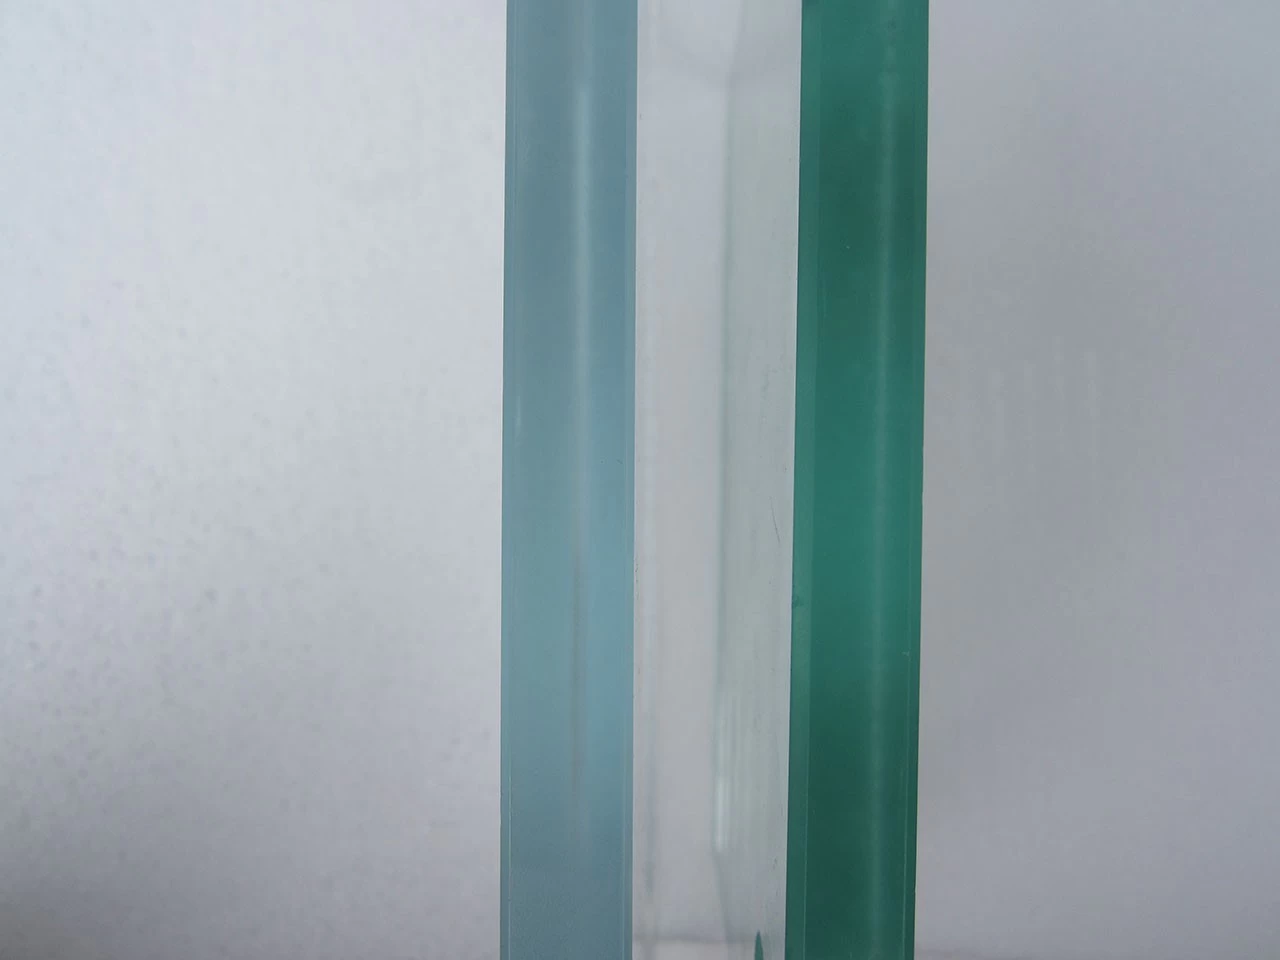 21.52MM  SGP Clear Tempered Laminated Glass, 10 10 1.52 SGP Sentry T Laminated Glass, bomb blasting resistance safety glass